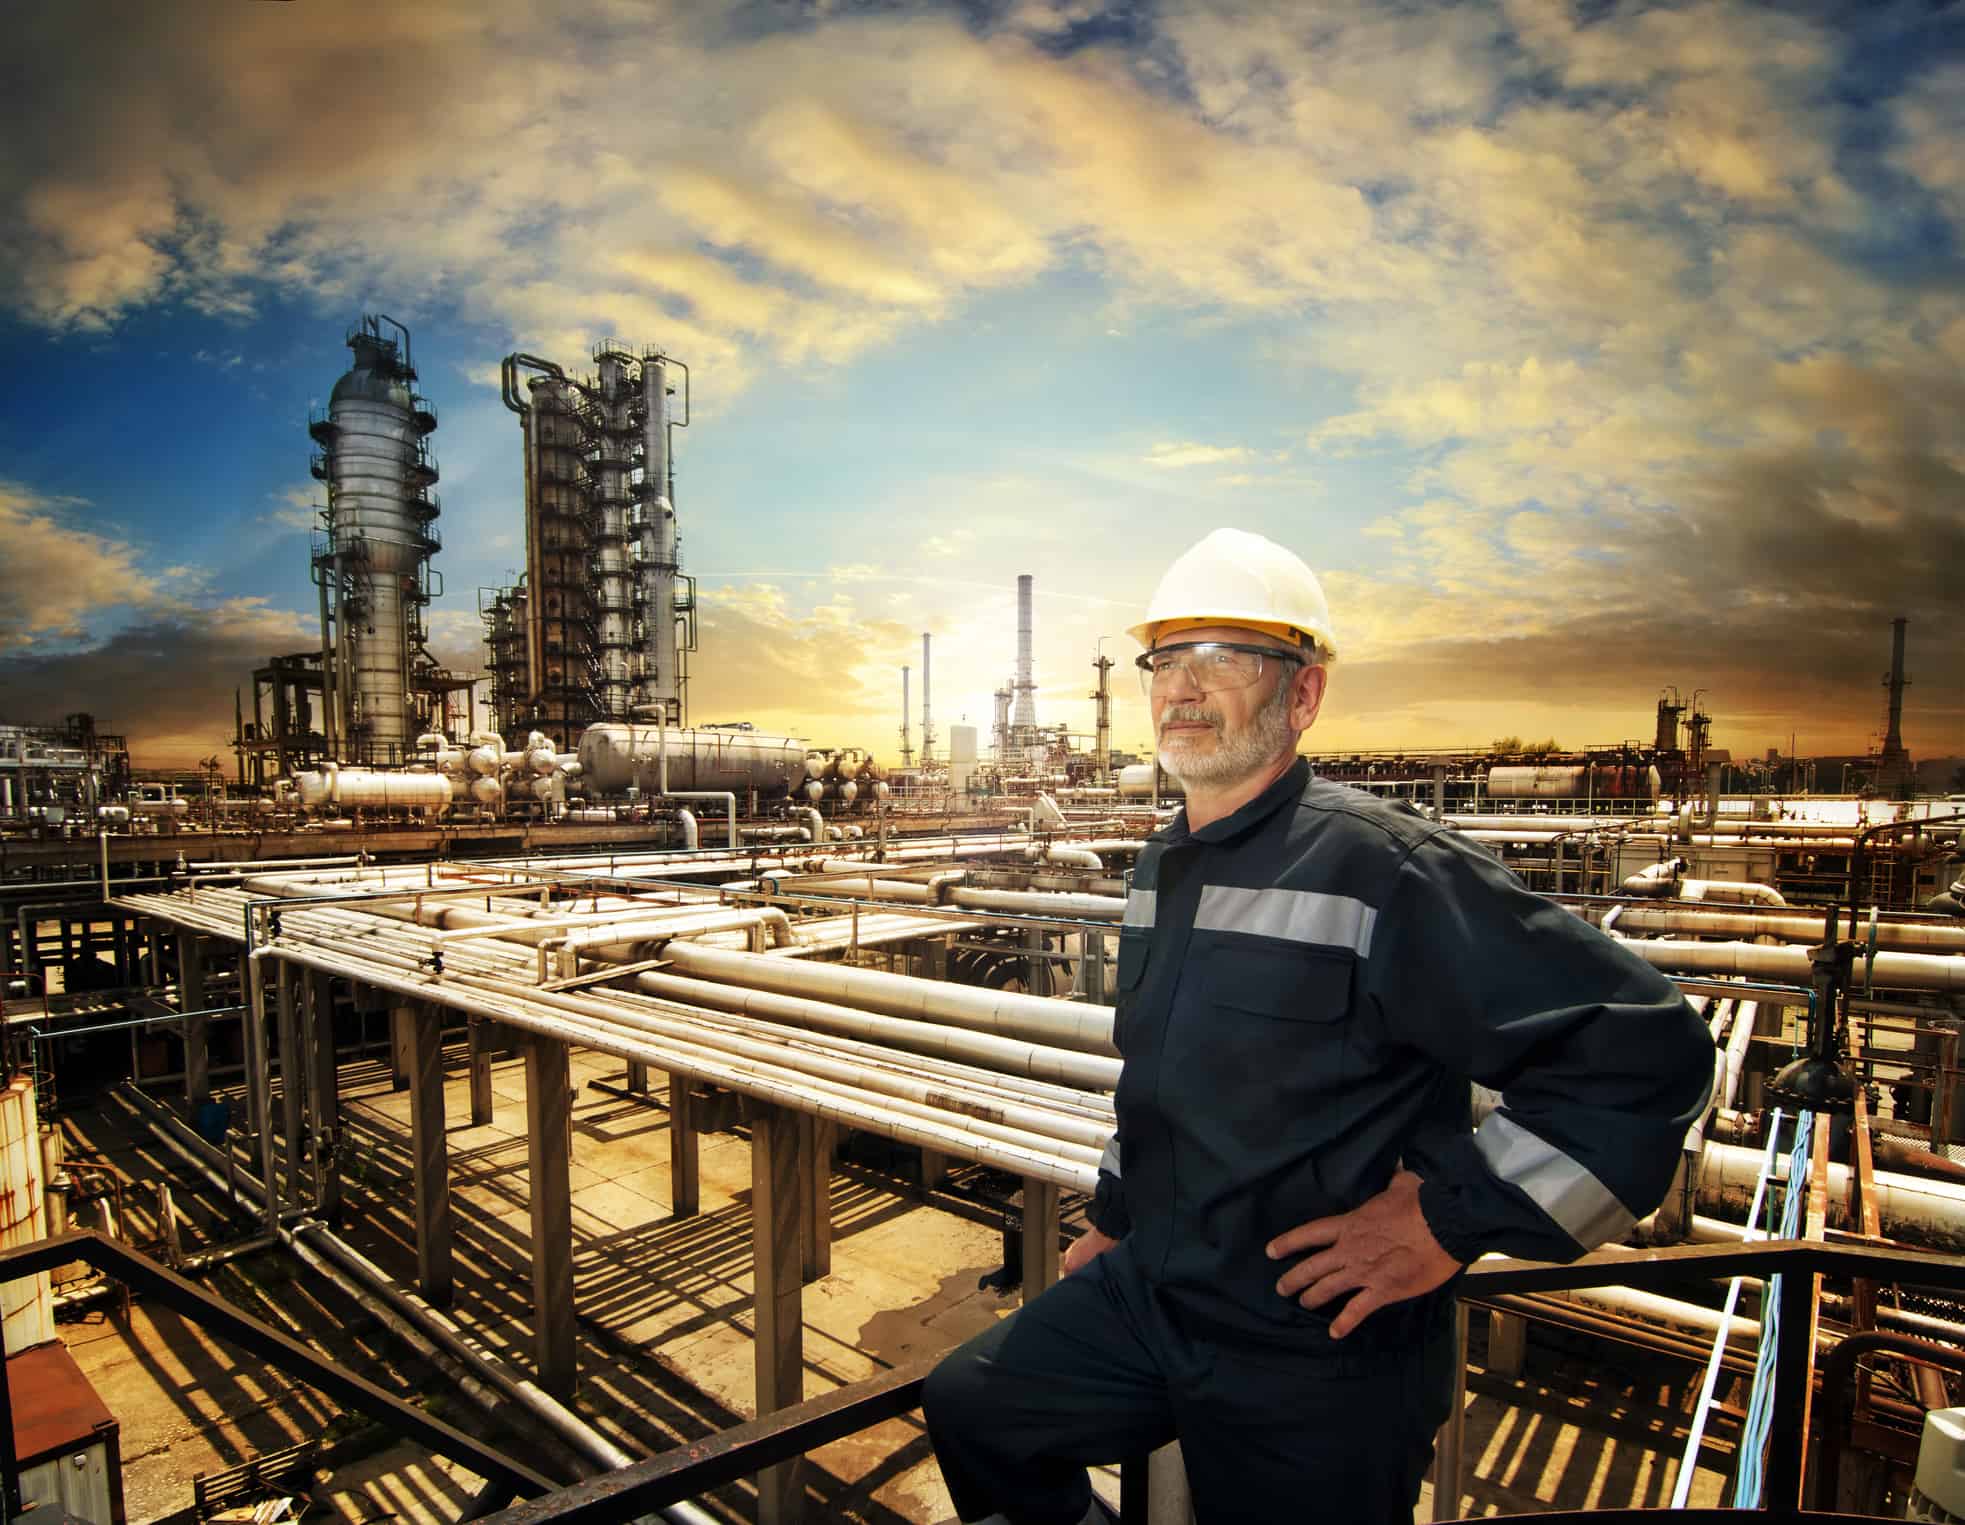 A worker overlooks an oil refinery plant.